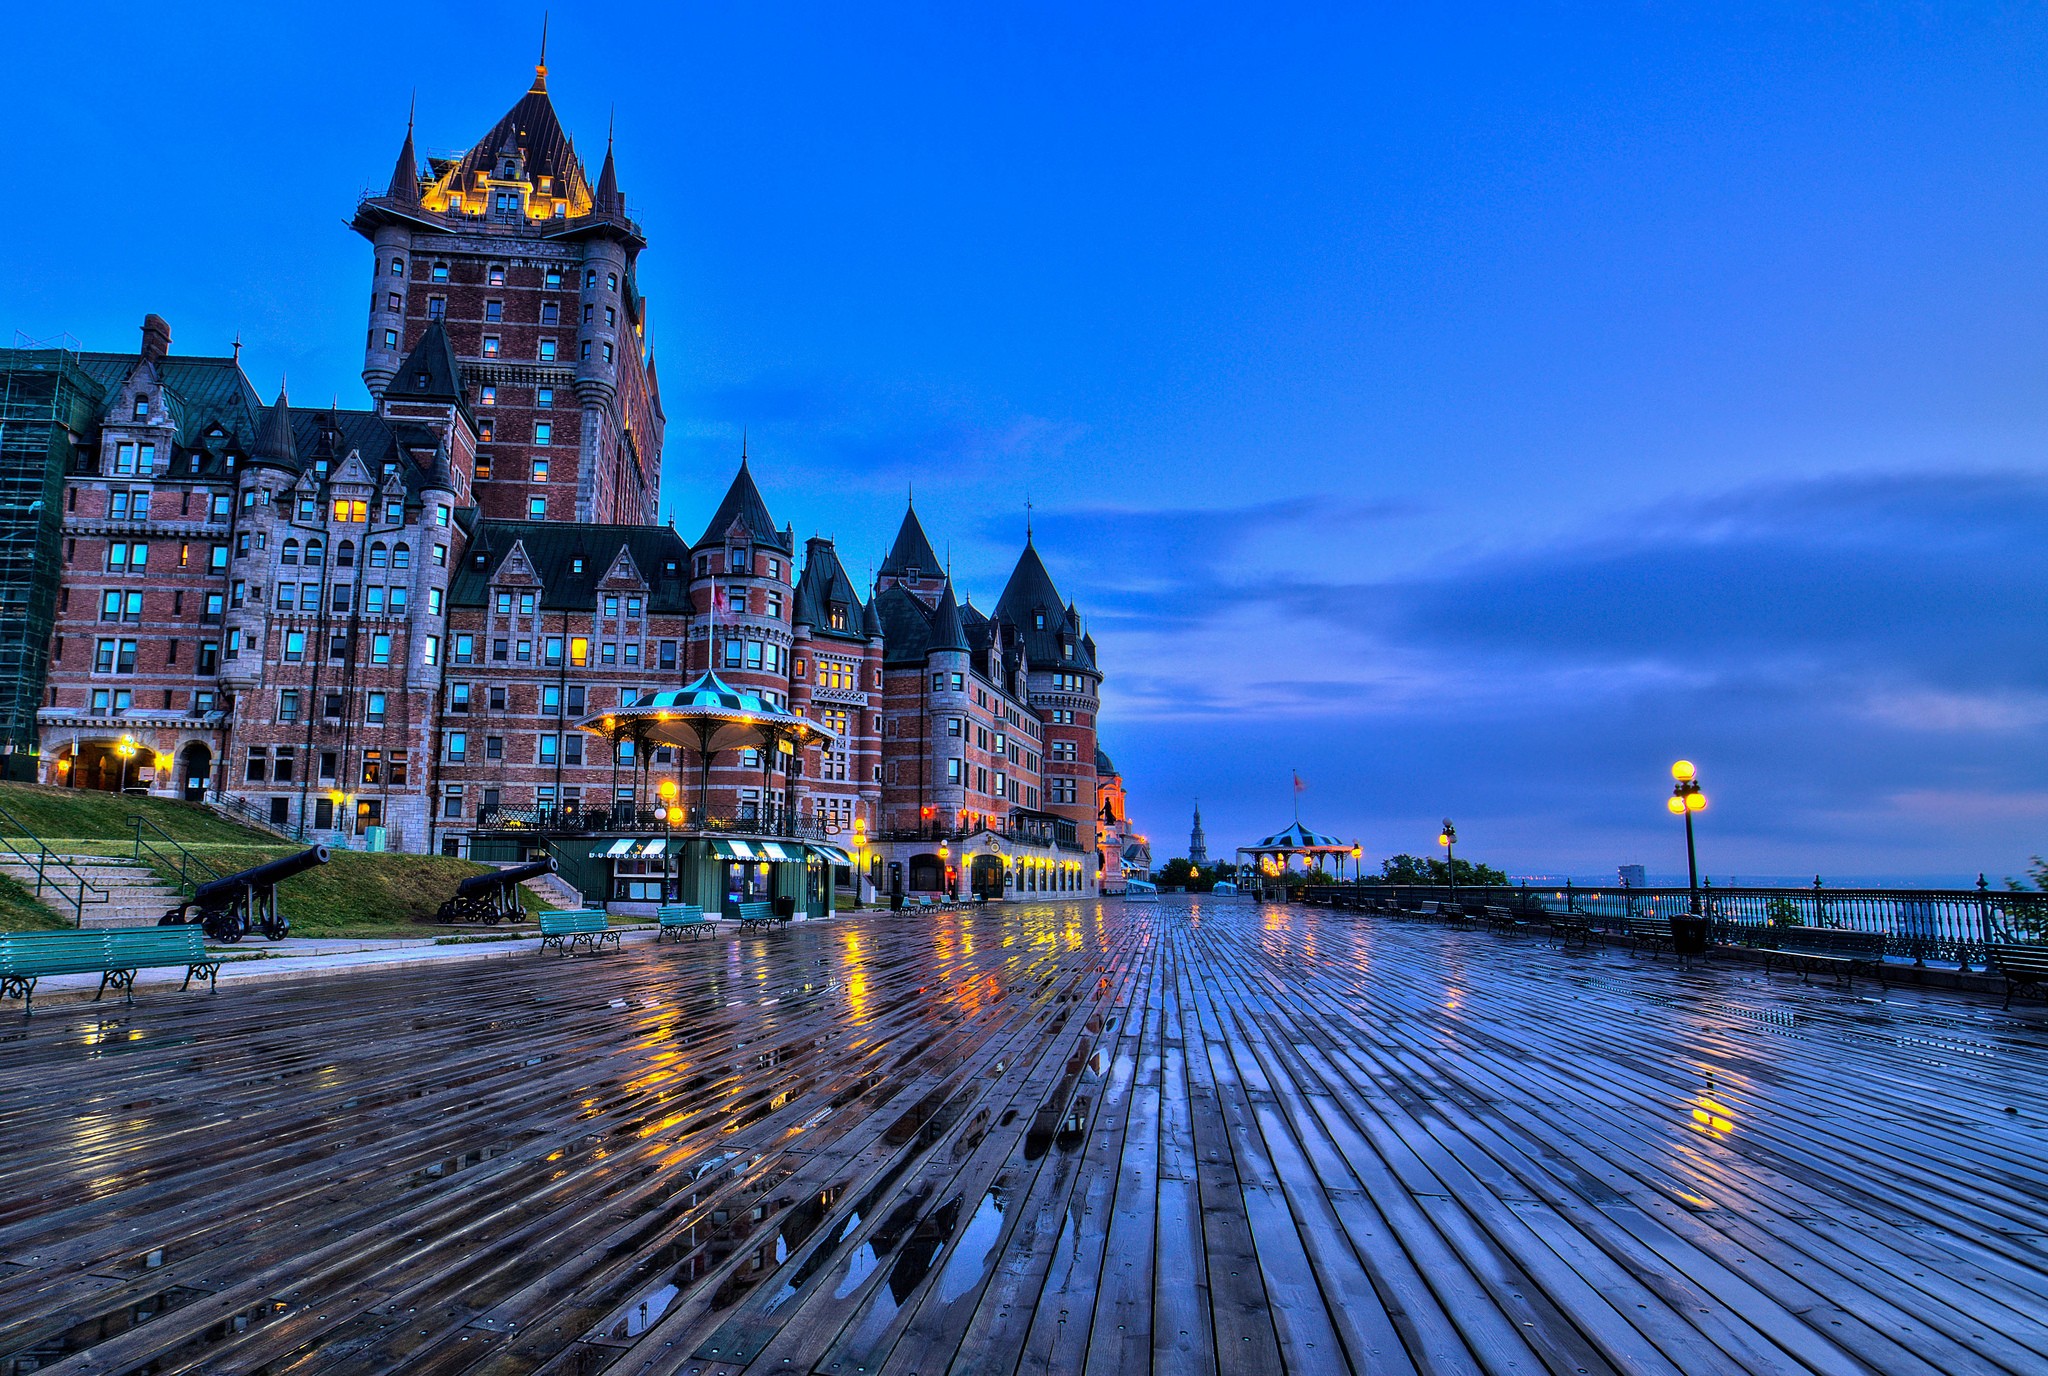 architecture, Building, Nature, Landscape, Trees, Quebec, Canada, Evening, Wet, Wooden surface, Wood planks, Water, Clouds, Reflection, Cannons, Lights,  Château Frontenac, Terrasse Dufferin, Terraces Wallpaper